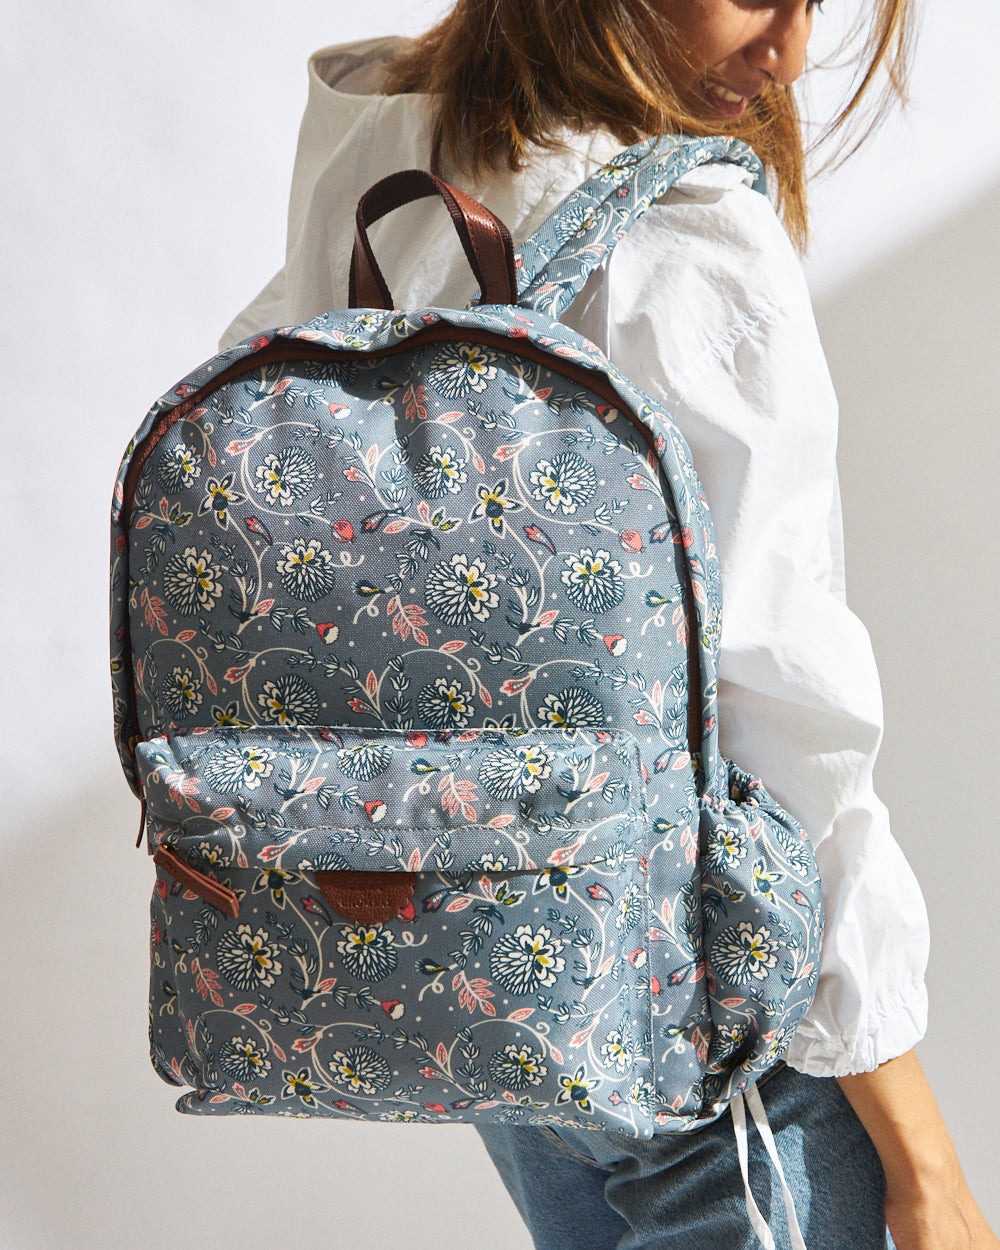 Teal by Chumbak Grey Bloom Laptop Backpack